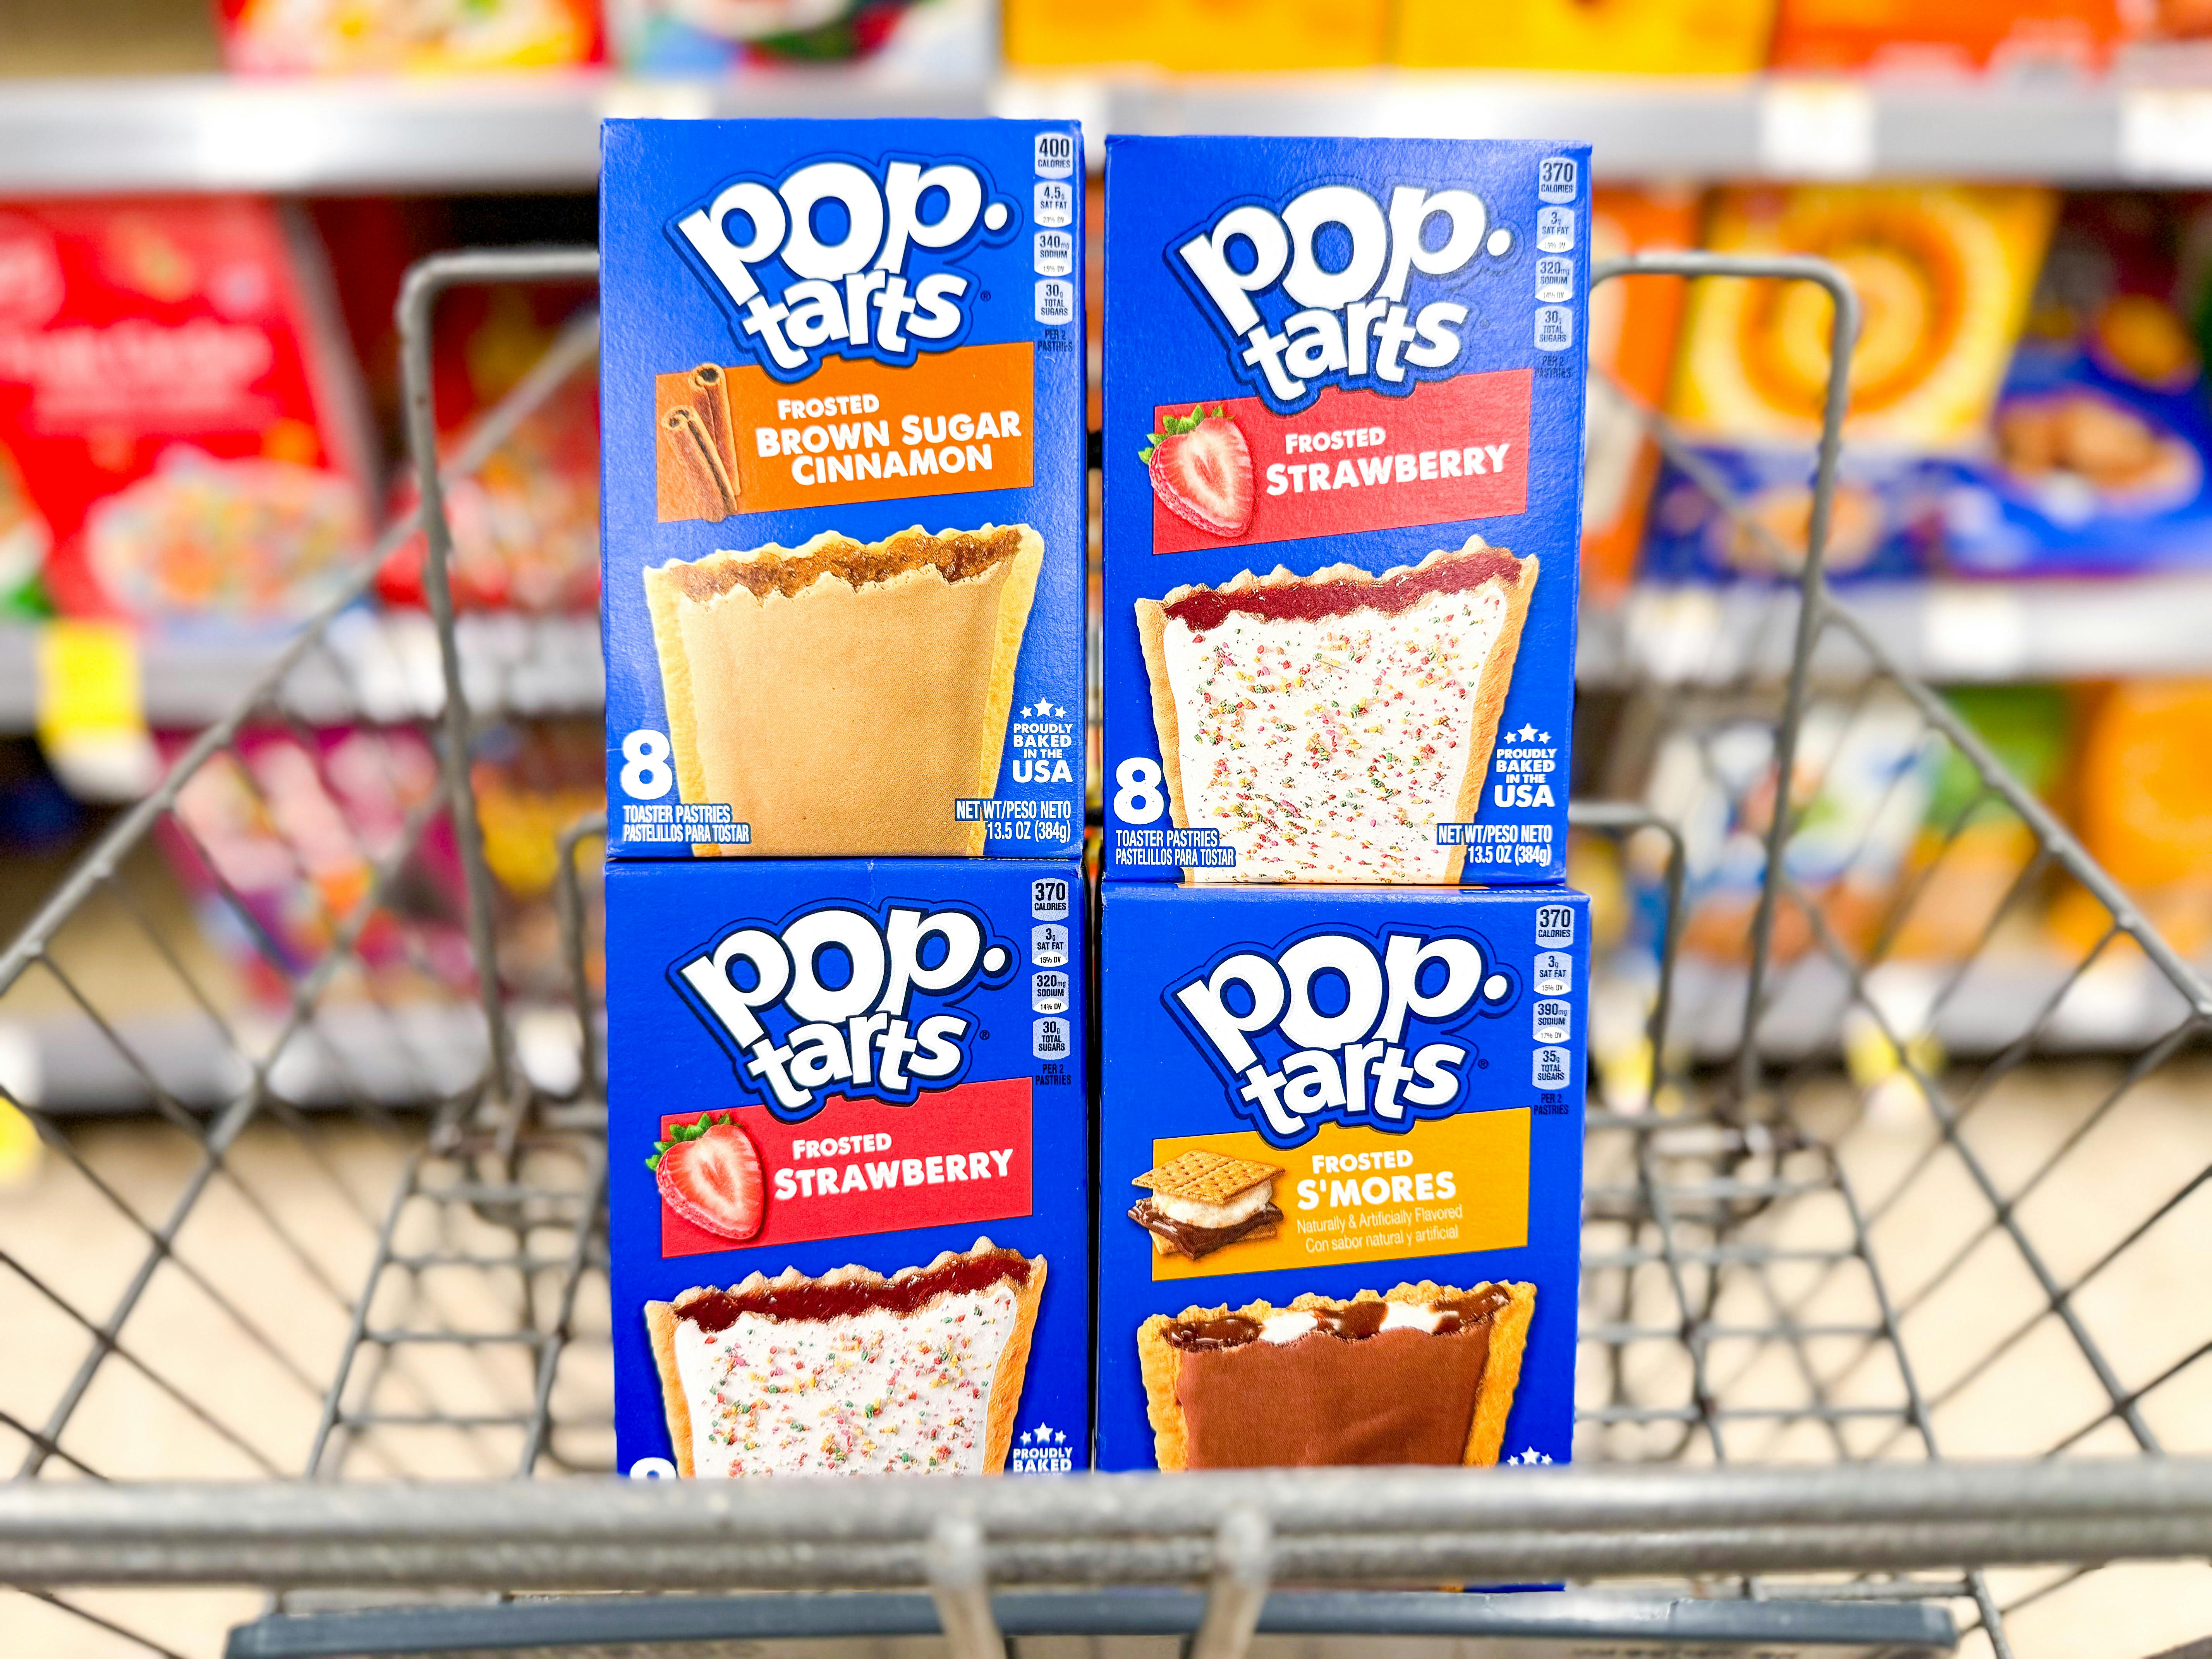 Buy One Get One Free Box of Pop Tarts at Walgreens - The Krazy Coupon Lady